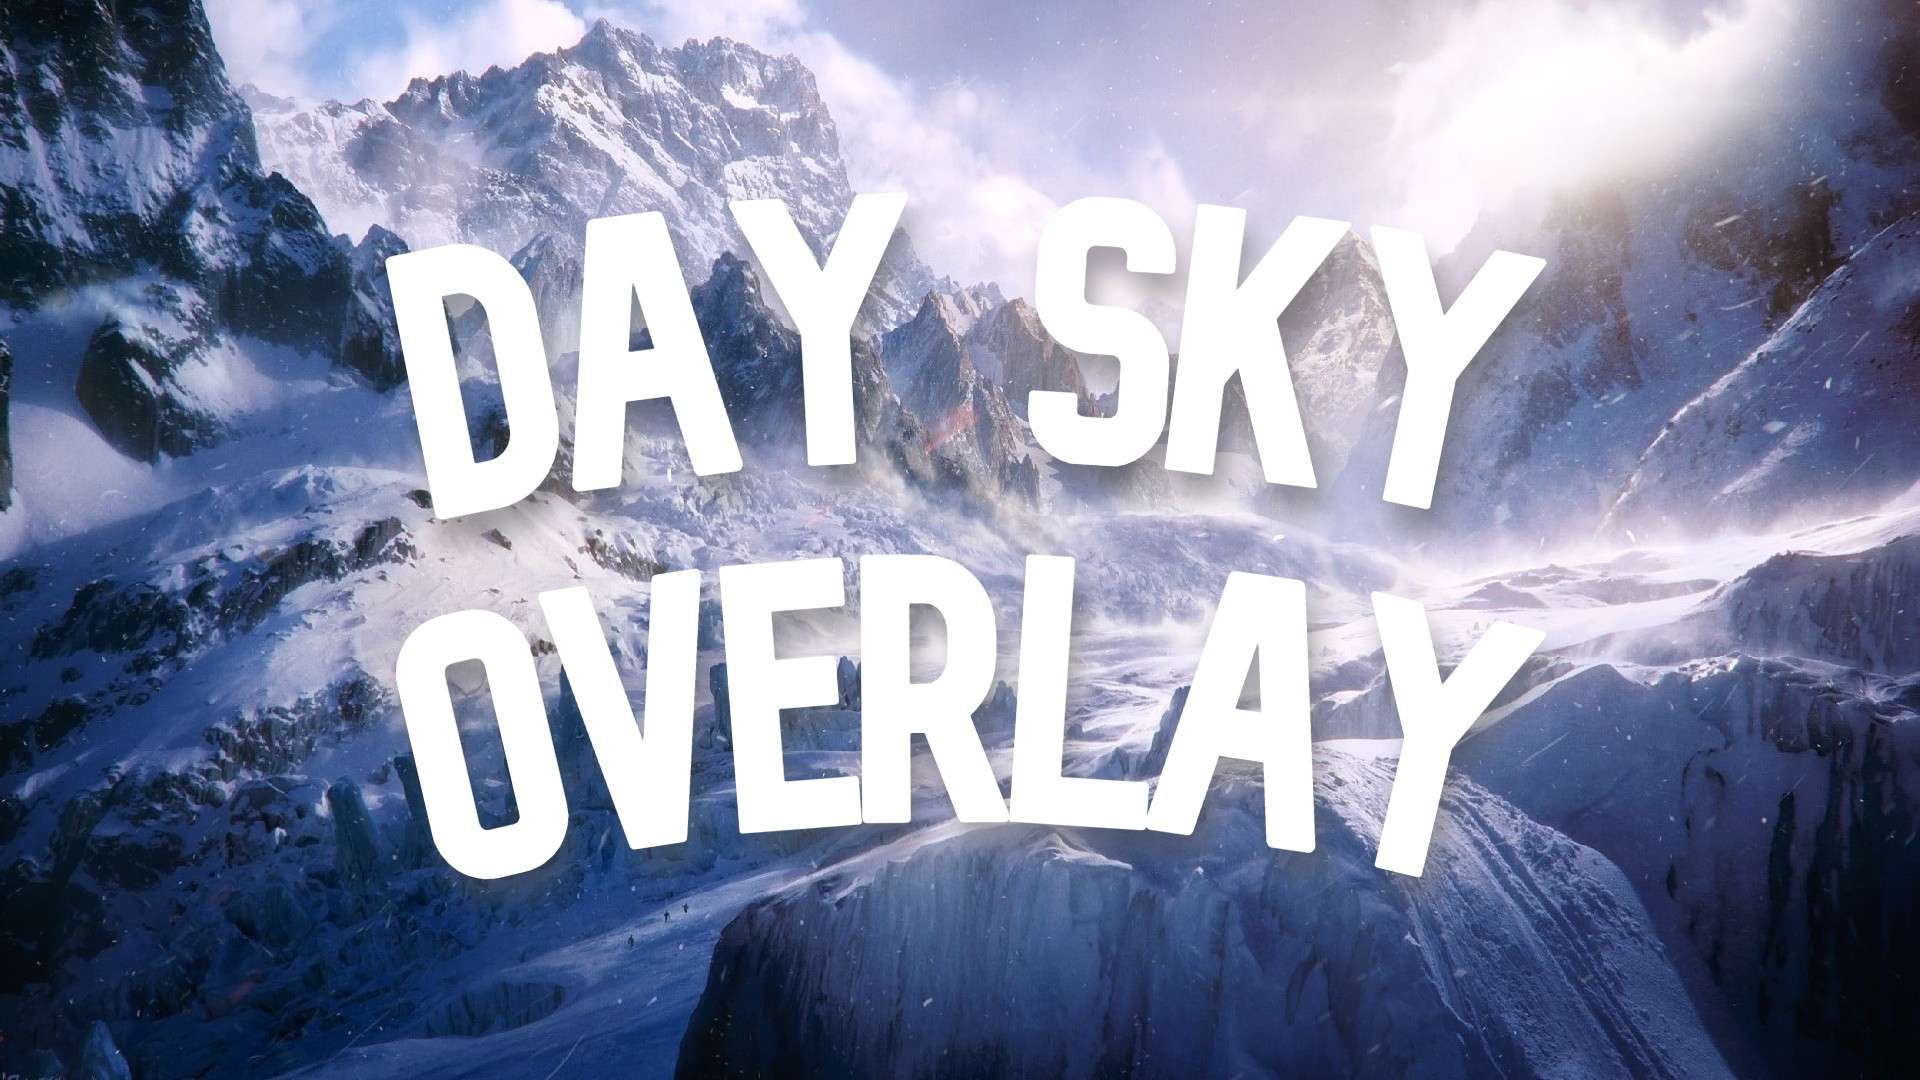 Day Sky Overlay #12 16 by rh56 on PvPRP